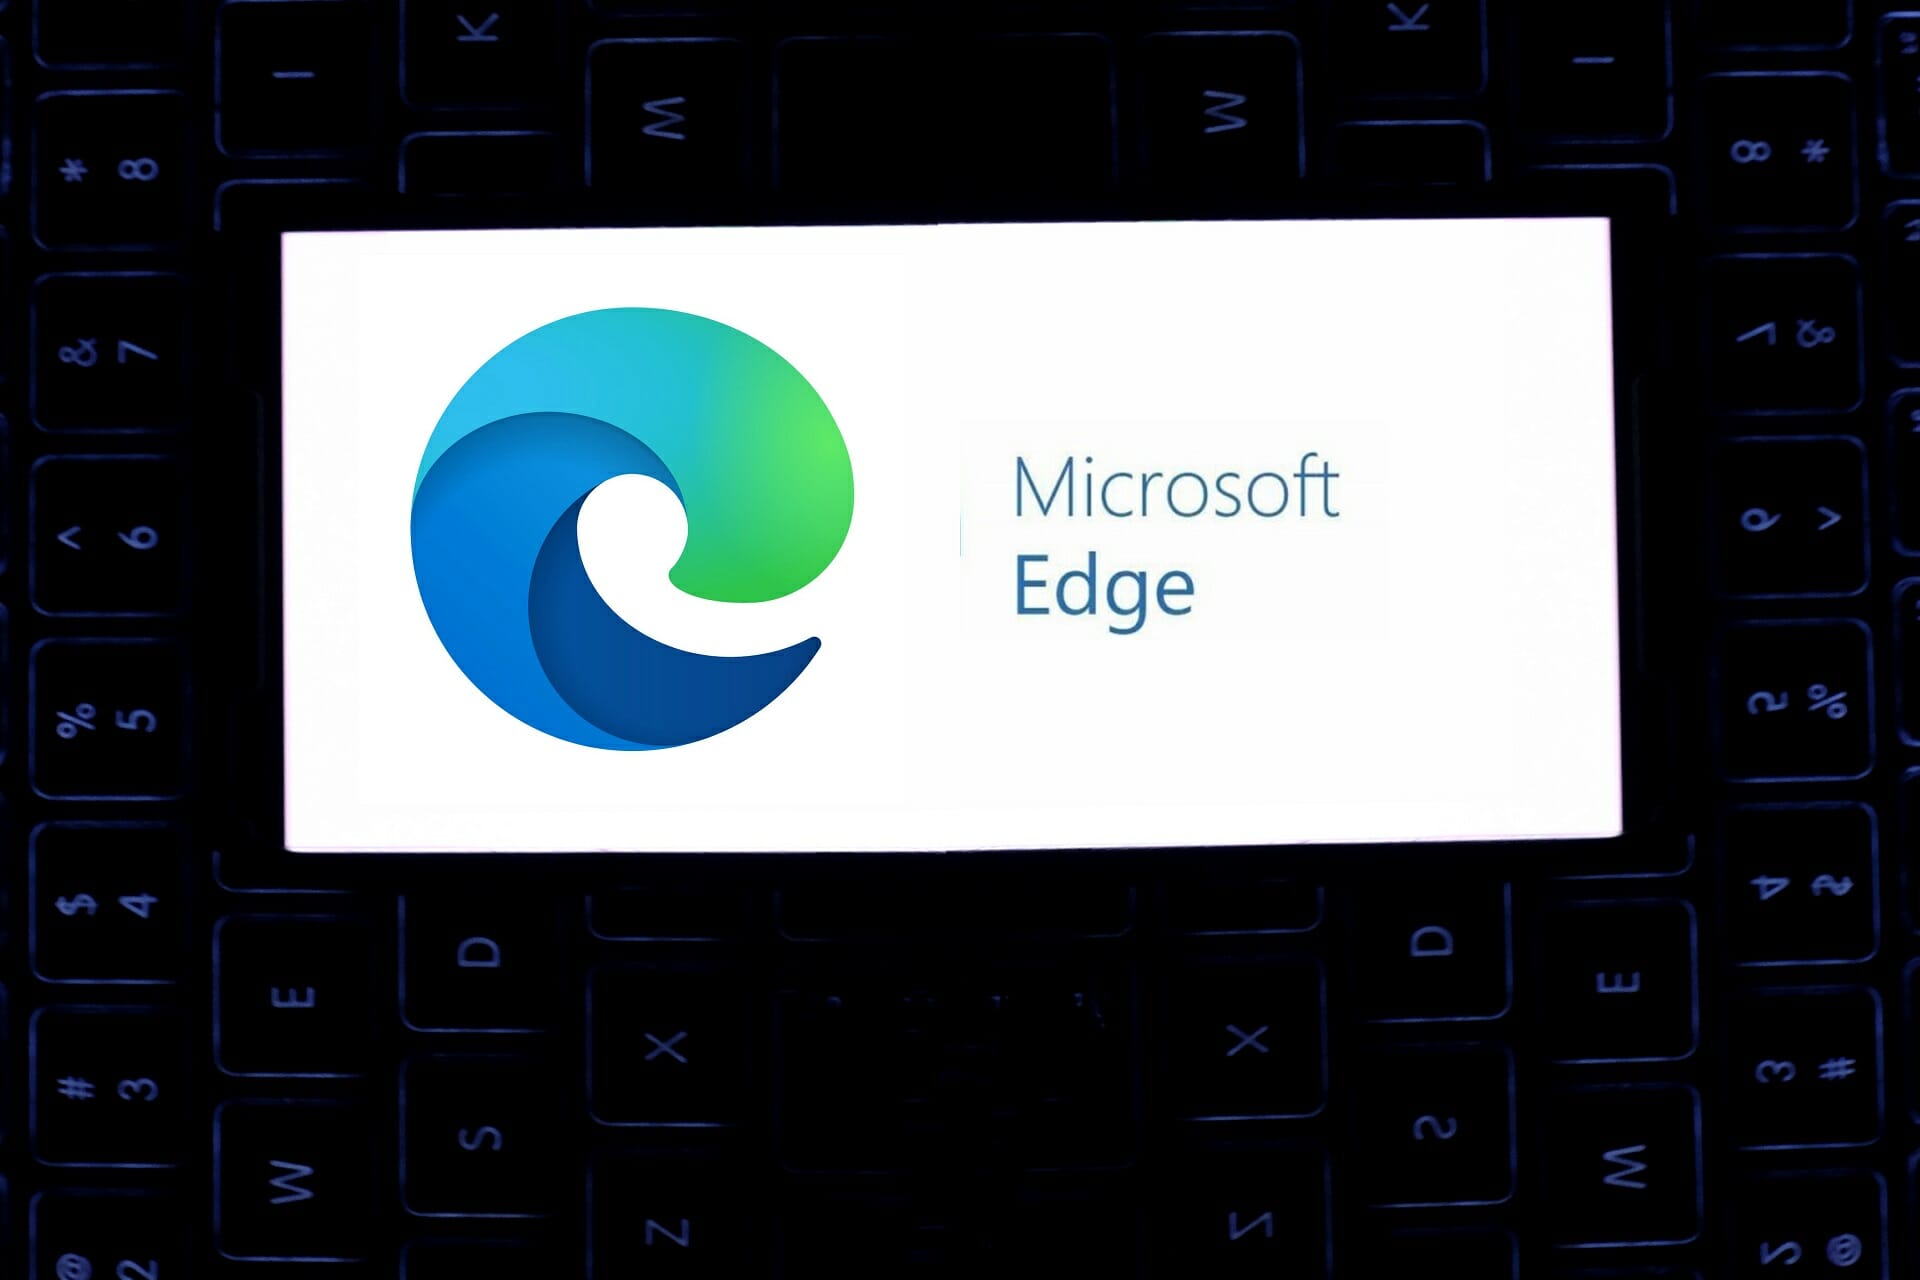 Microsoft will adds new enterprise features to Edge 85